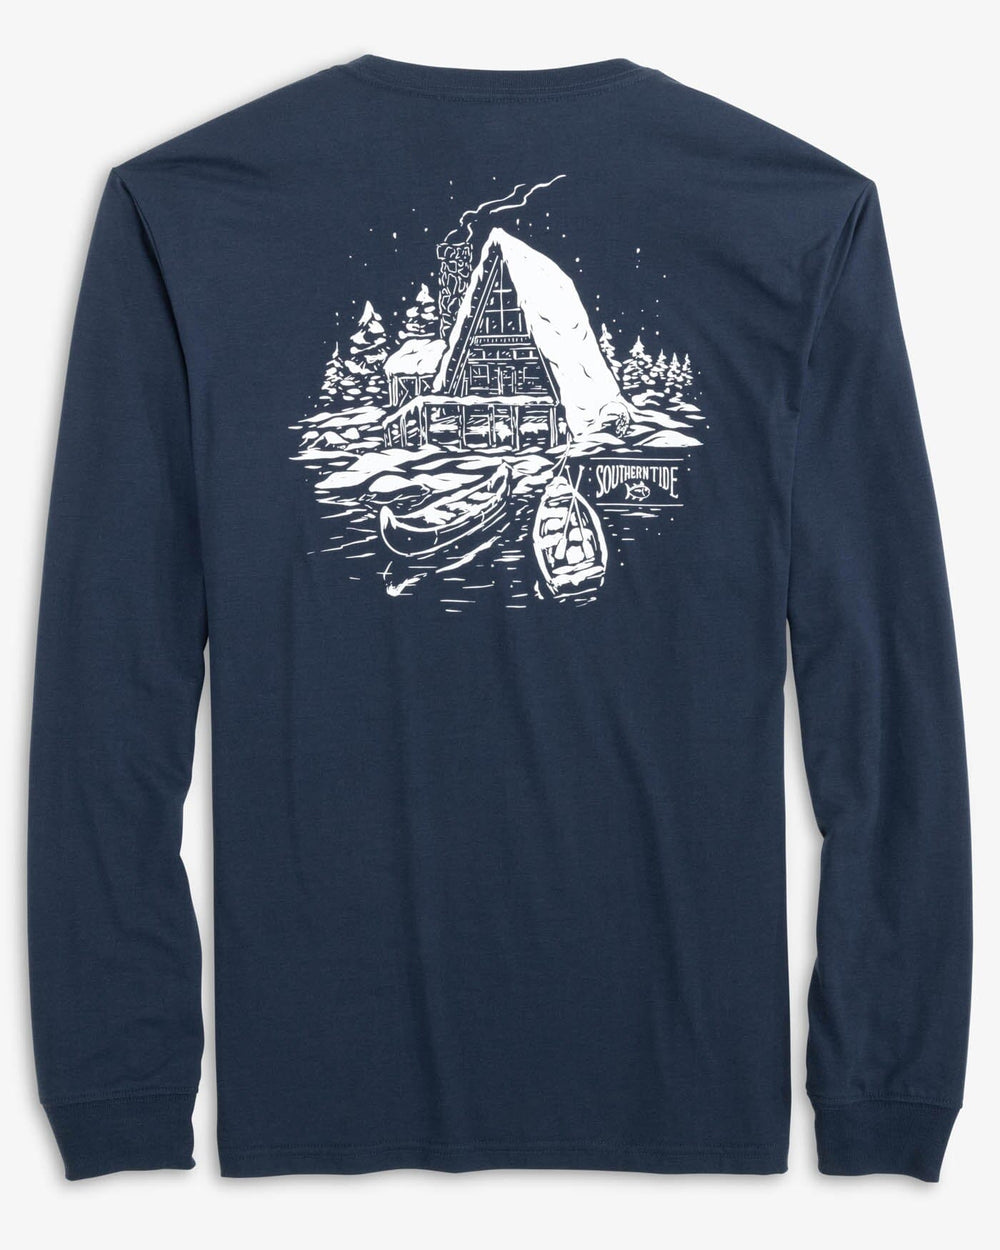 The back view of the Southern Tide Chillin at the Cabin Long Sleeve T-shirt by Southern Tide - True Navy